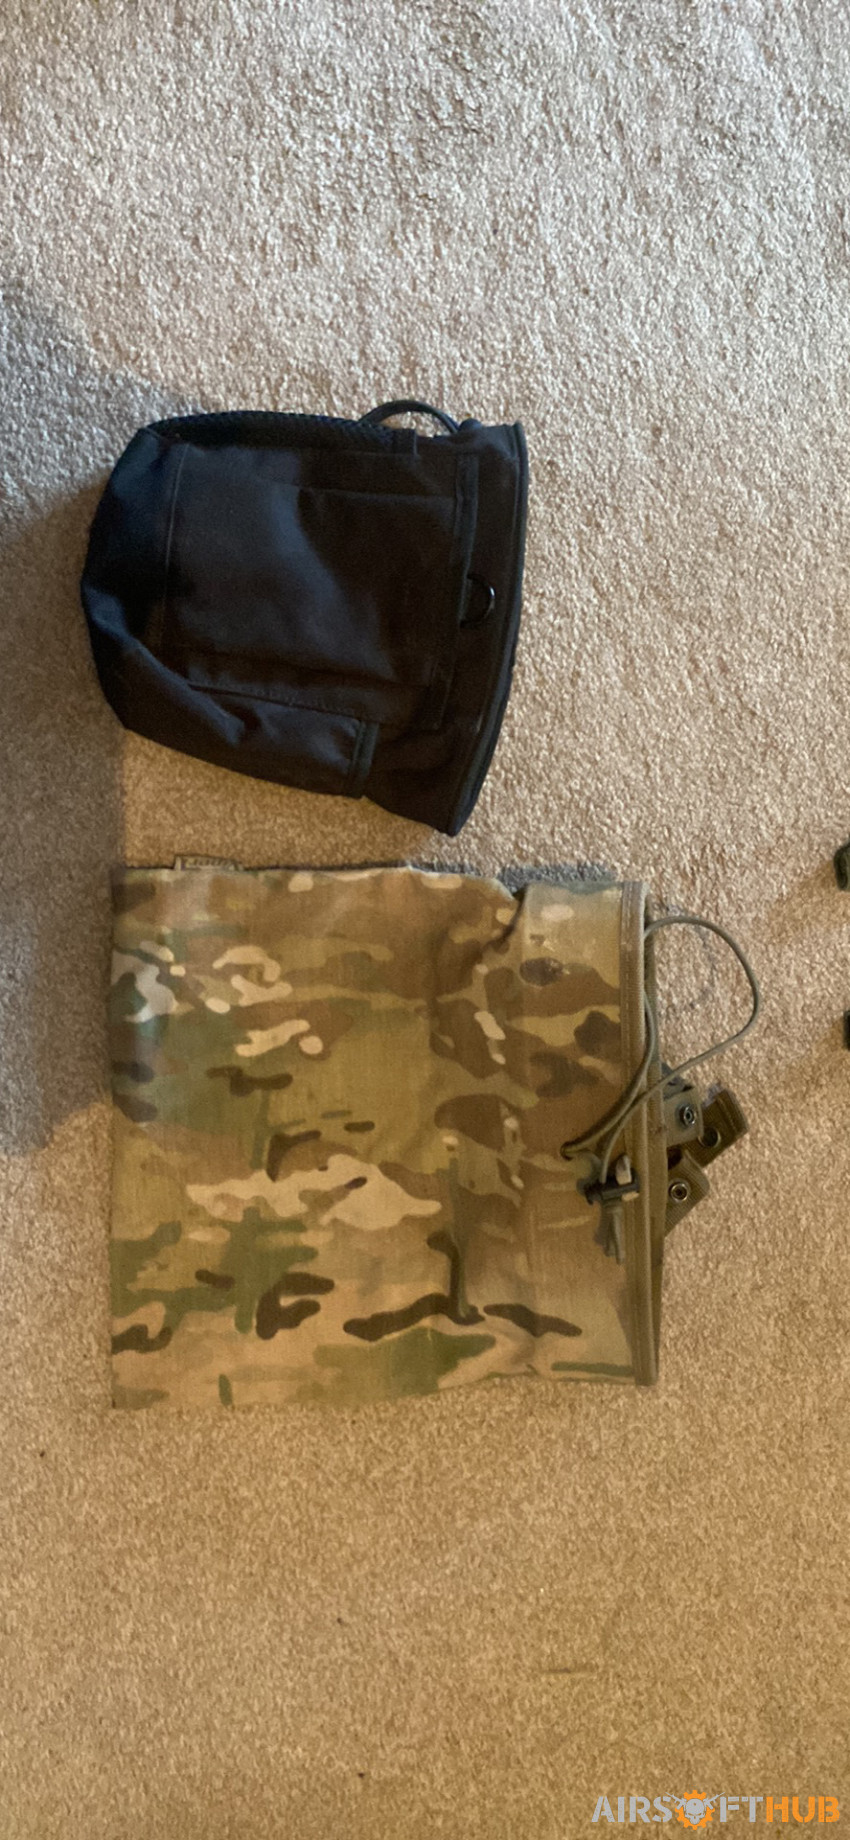 Airsoft kit and equipment - Used airsoft equipment